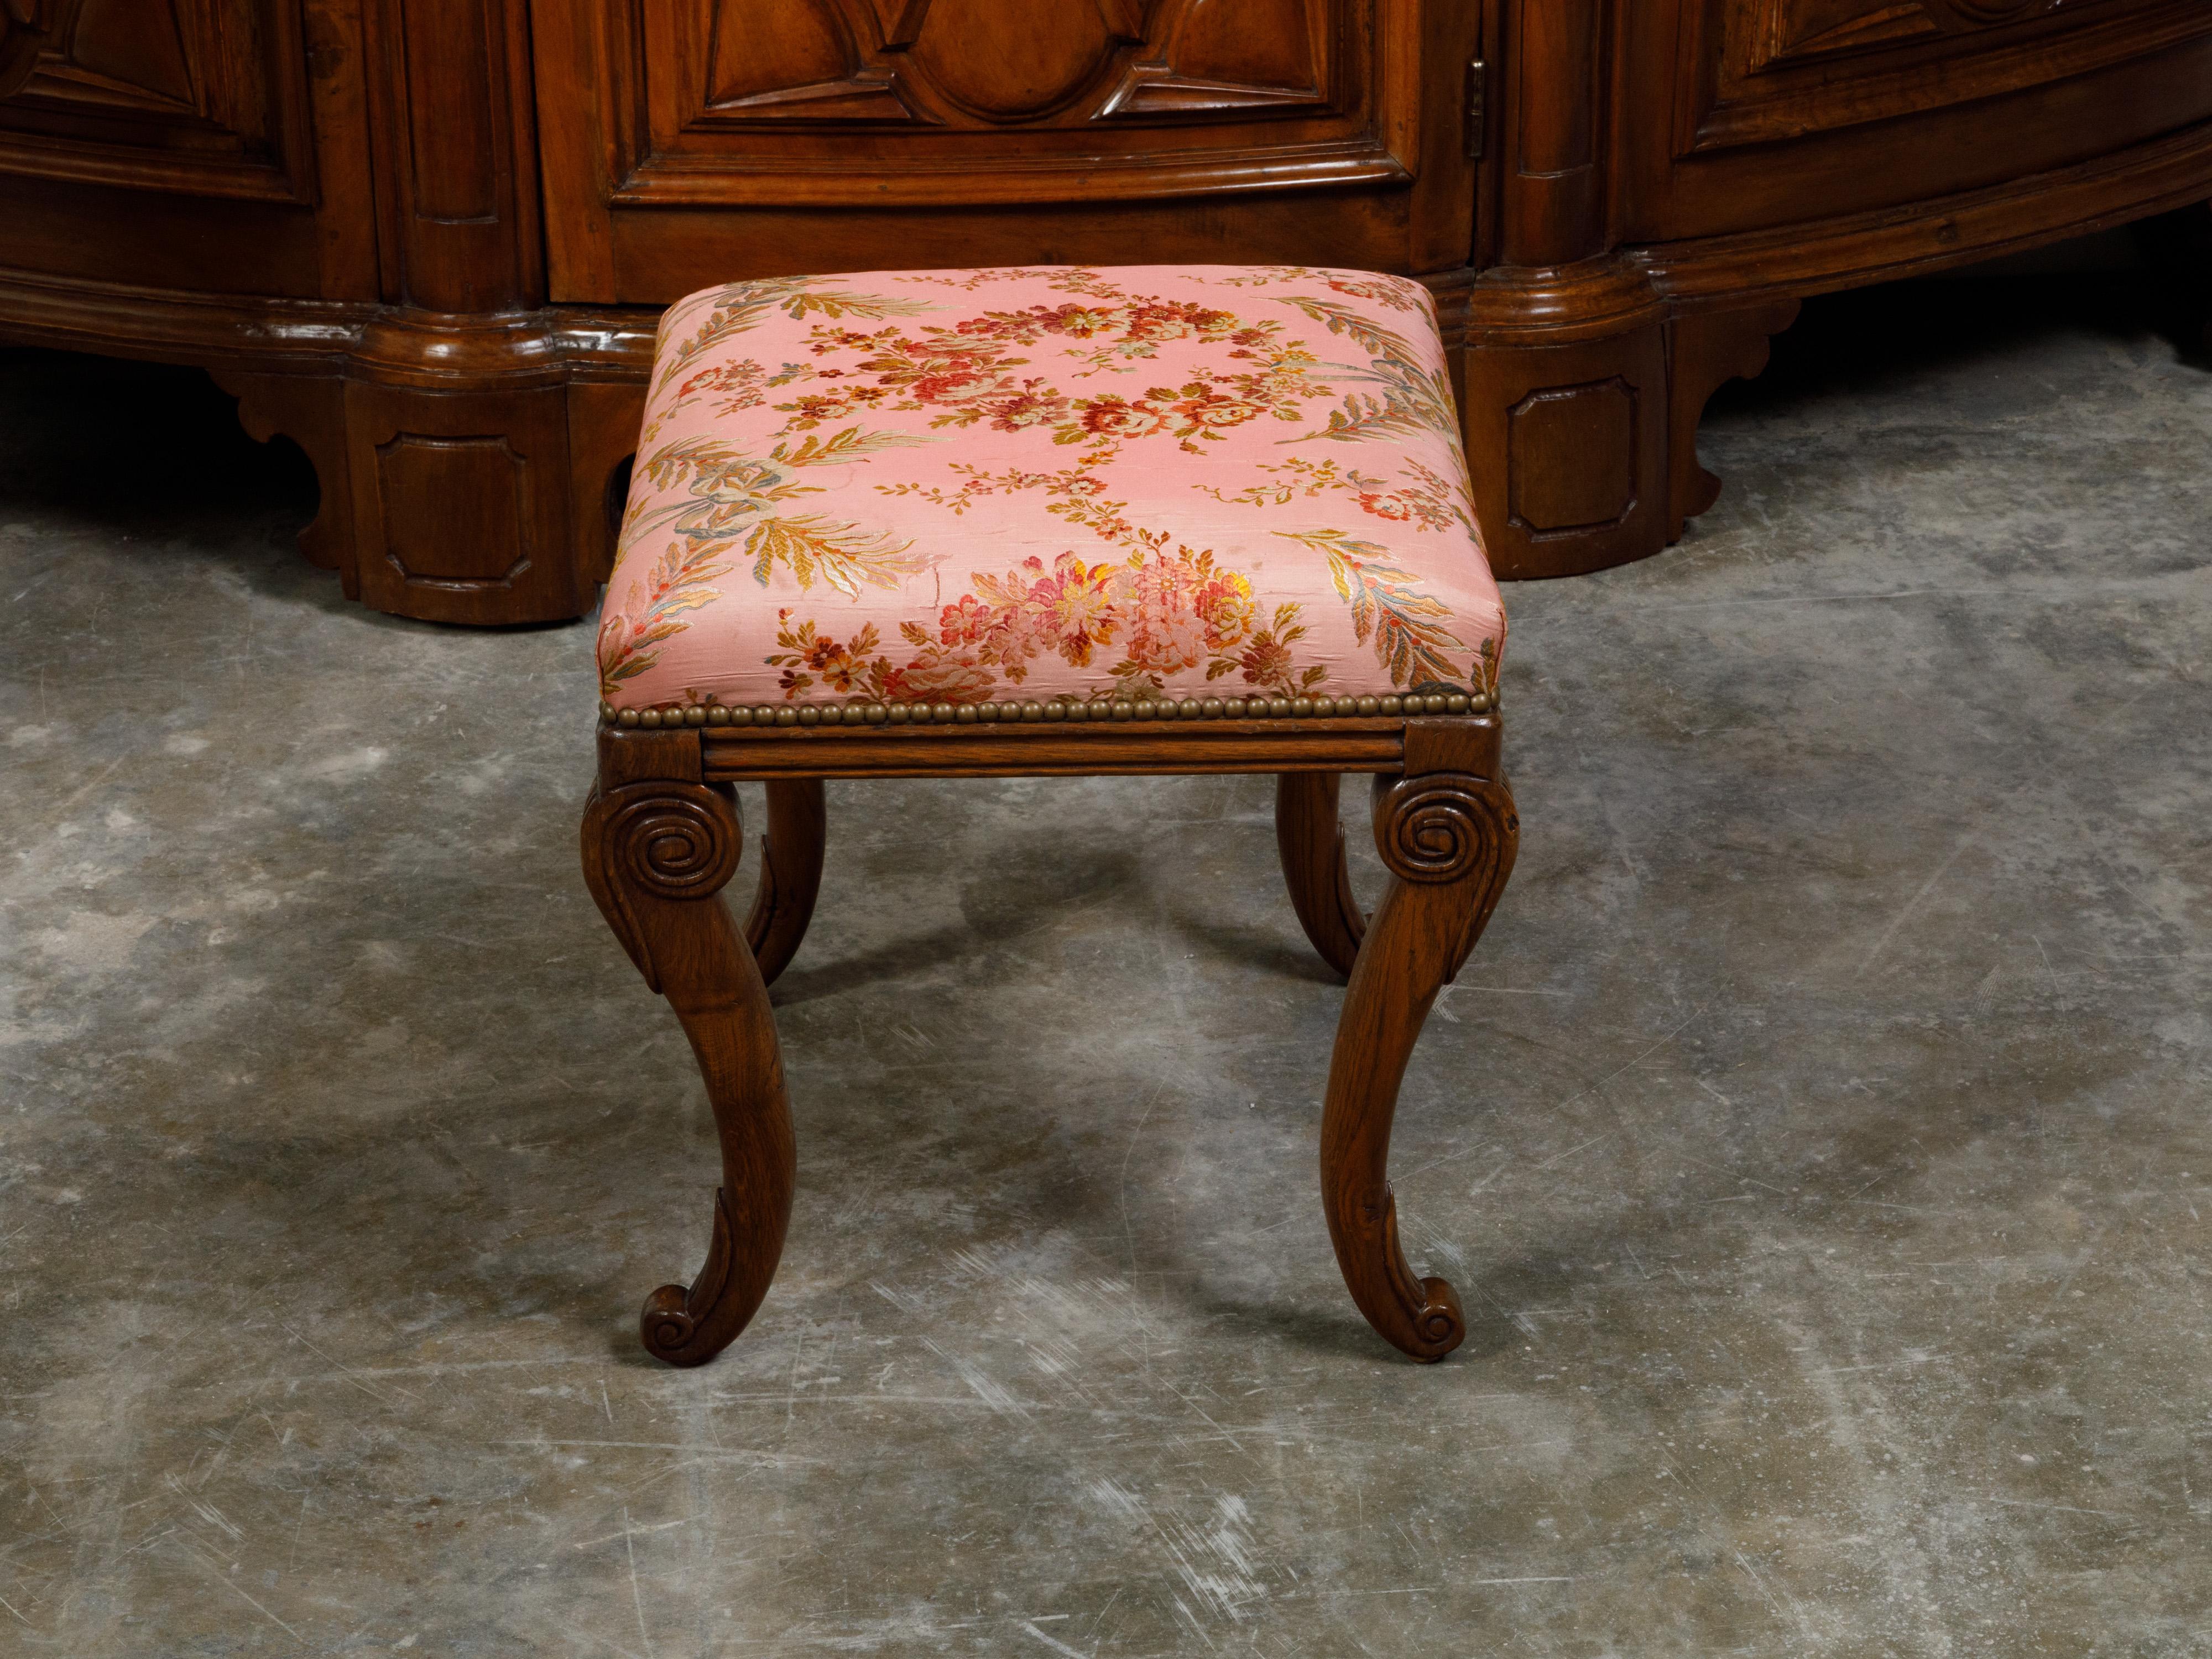 English 1820s Mahogany Stool with Floral Themed Upholstery and Cabriole Legs For Sale 2